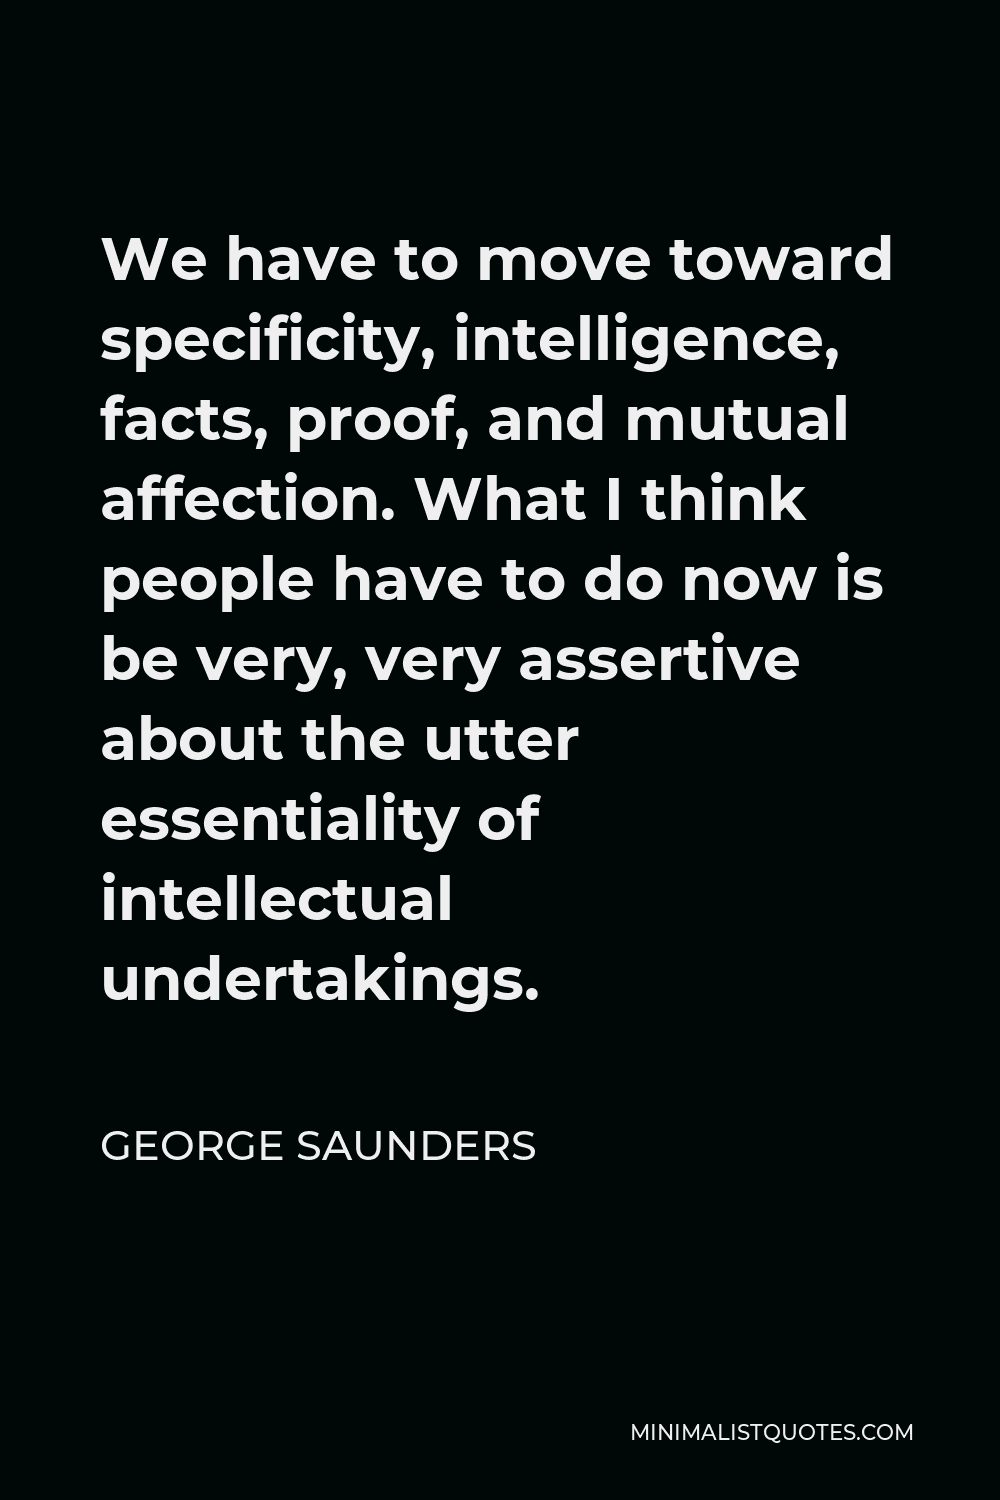 George Saunders Quote - We have to move toward specificity, intelligence, facts, proof, and mutual affection. What I think people have to do now is be very, very assertive about the utter essentiality of intellectual undertakings.